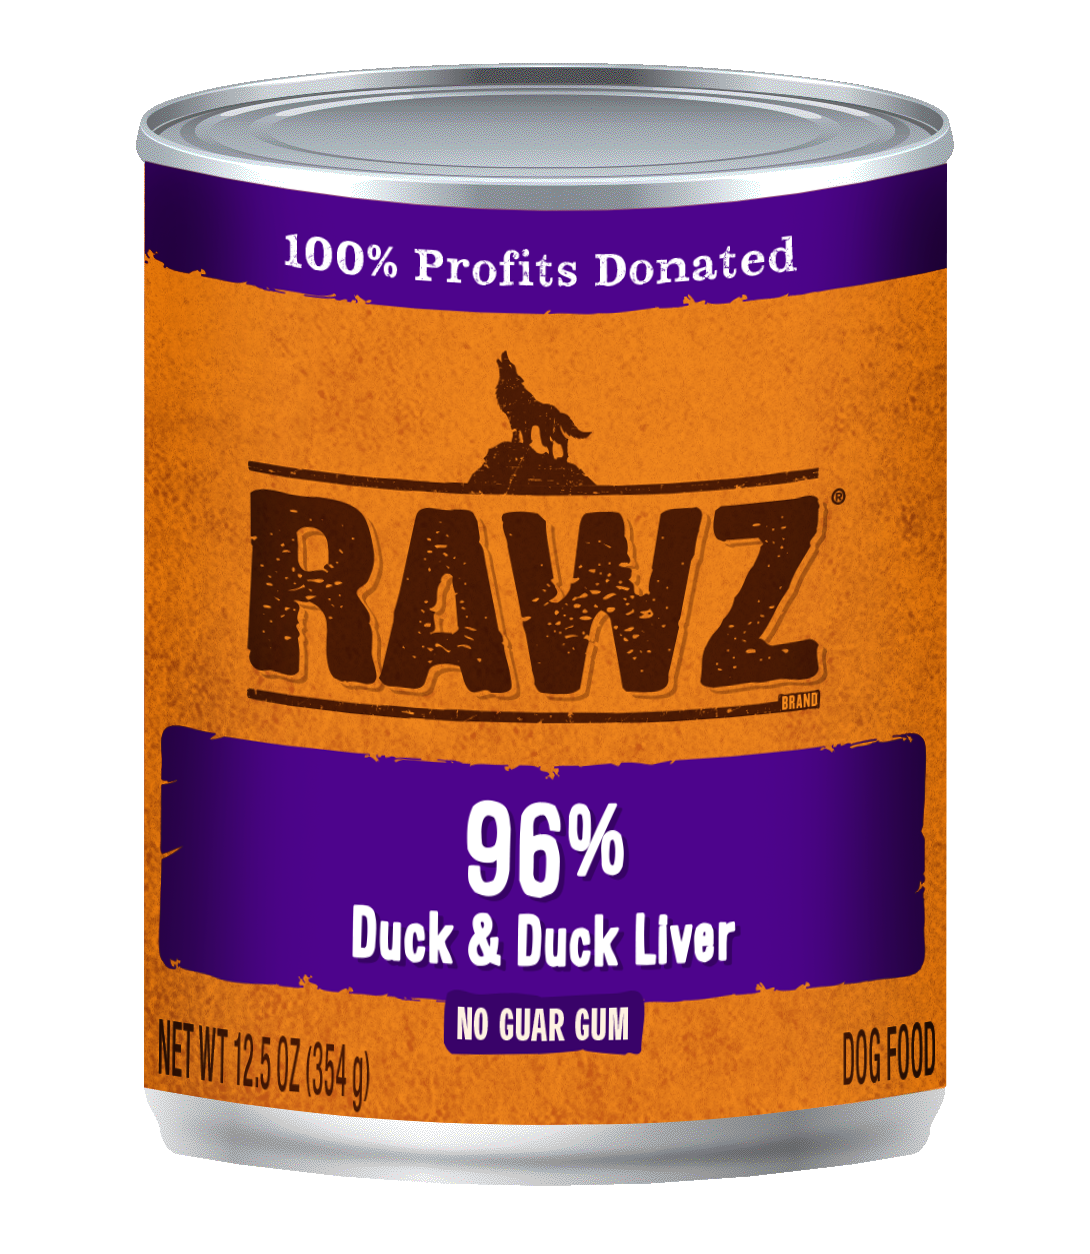 RAWZ 96% Duck & Duck Liver Canned Food for Dogs